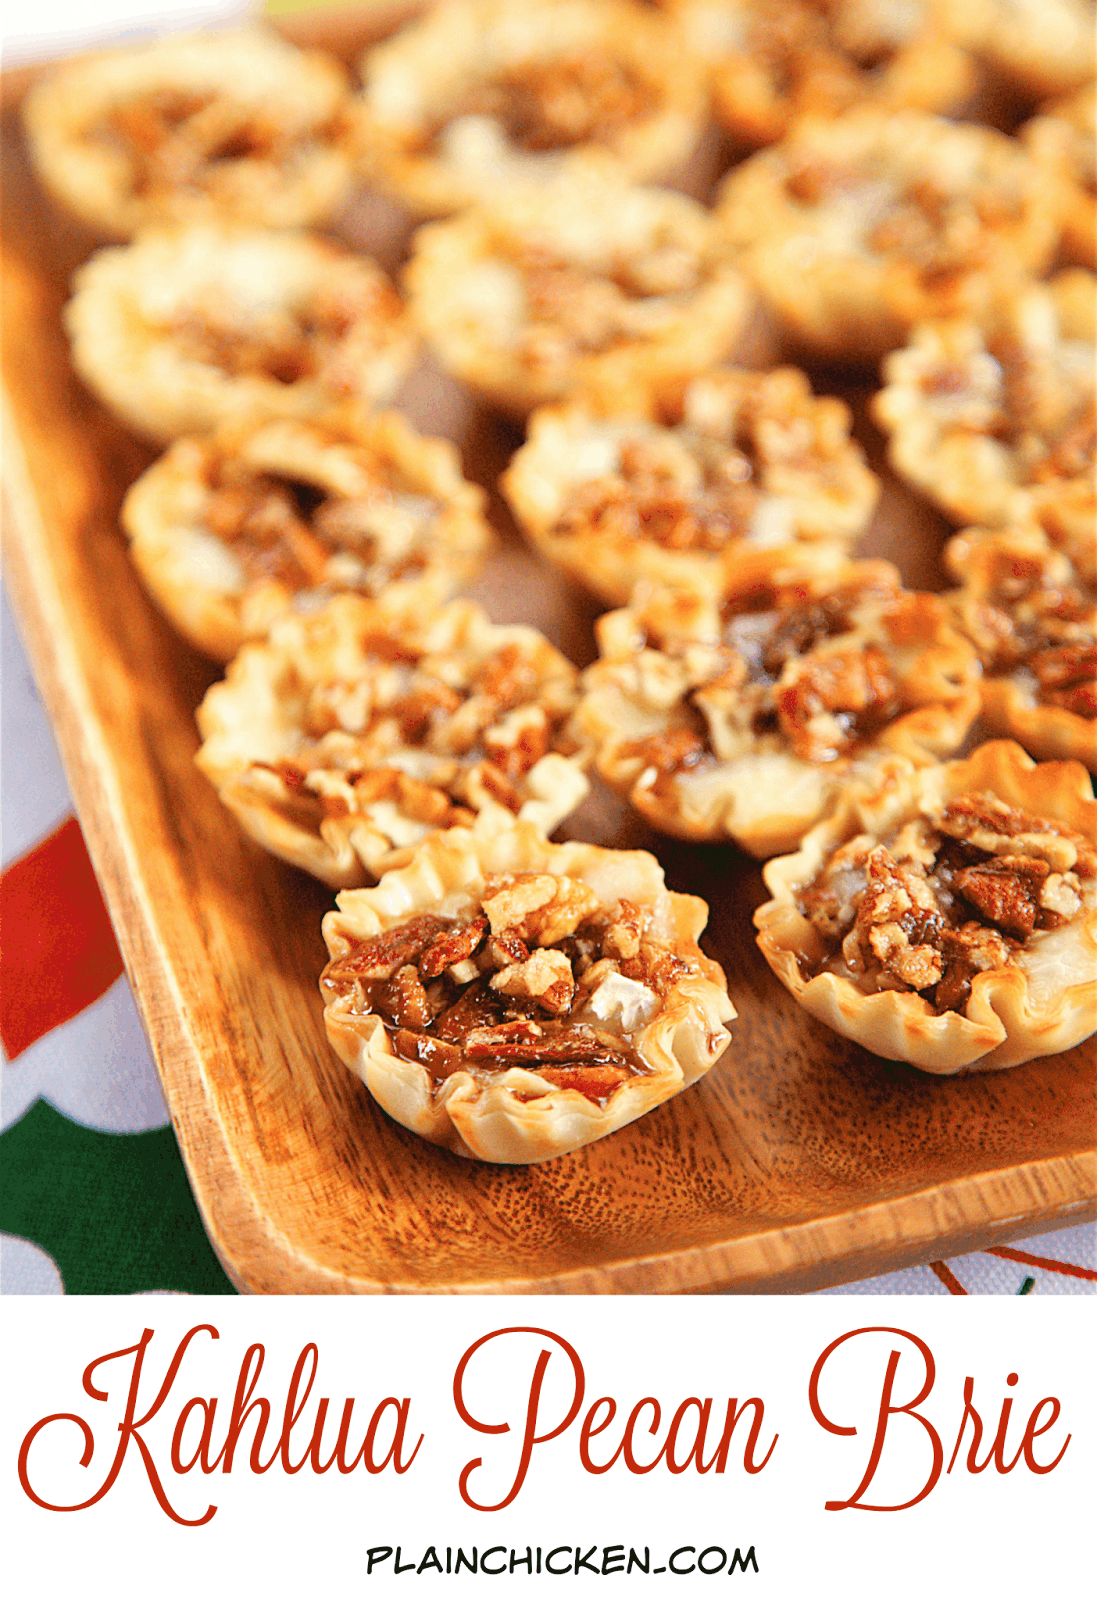 Kahlua Pecan Brie Bites - only 5 ingredients! Can assemble ahead of time and refrigerate until ready to bake. Perfect party food!